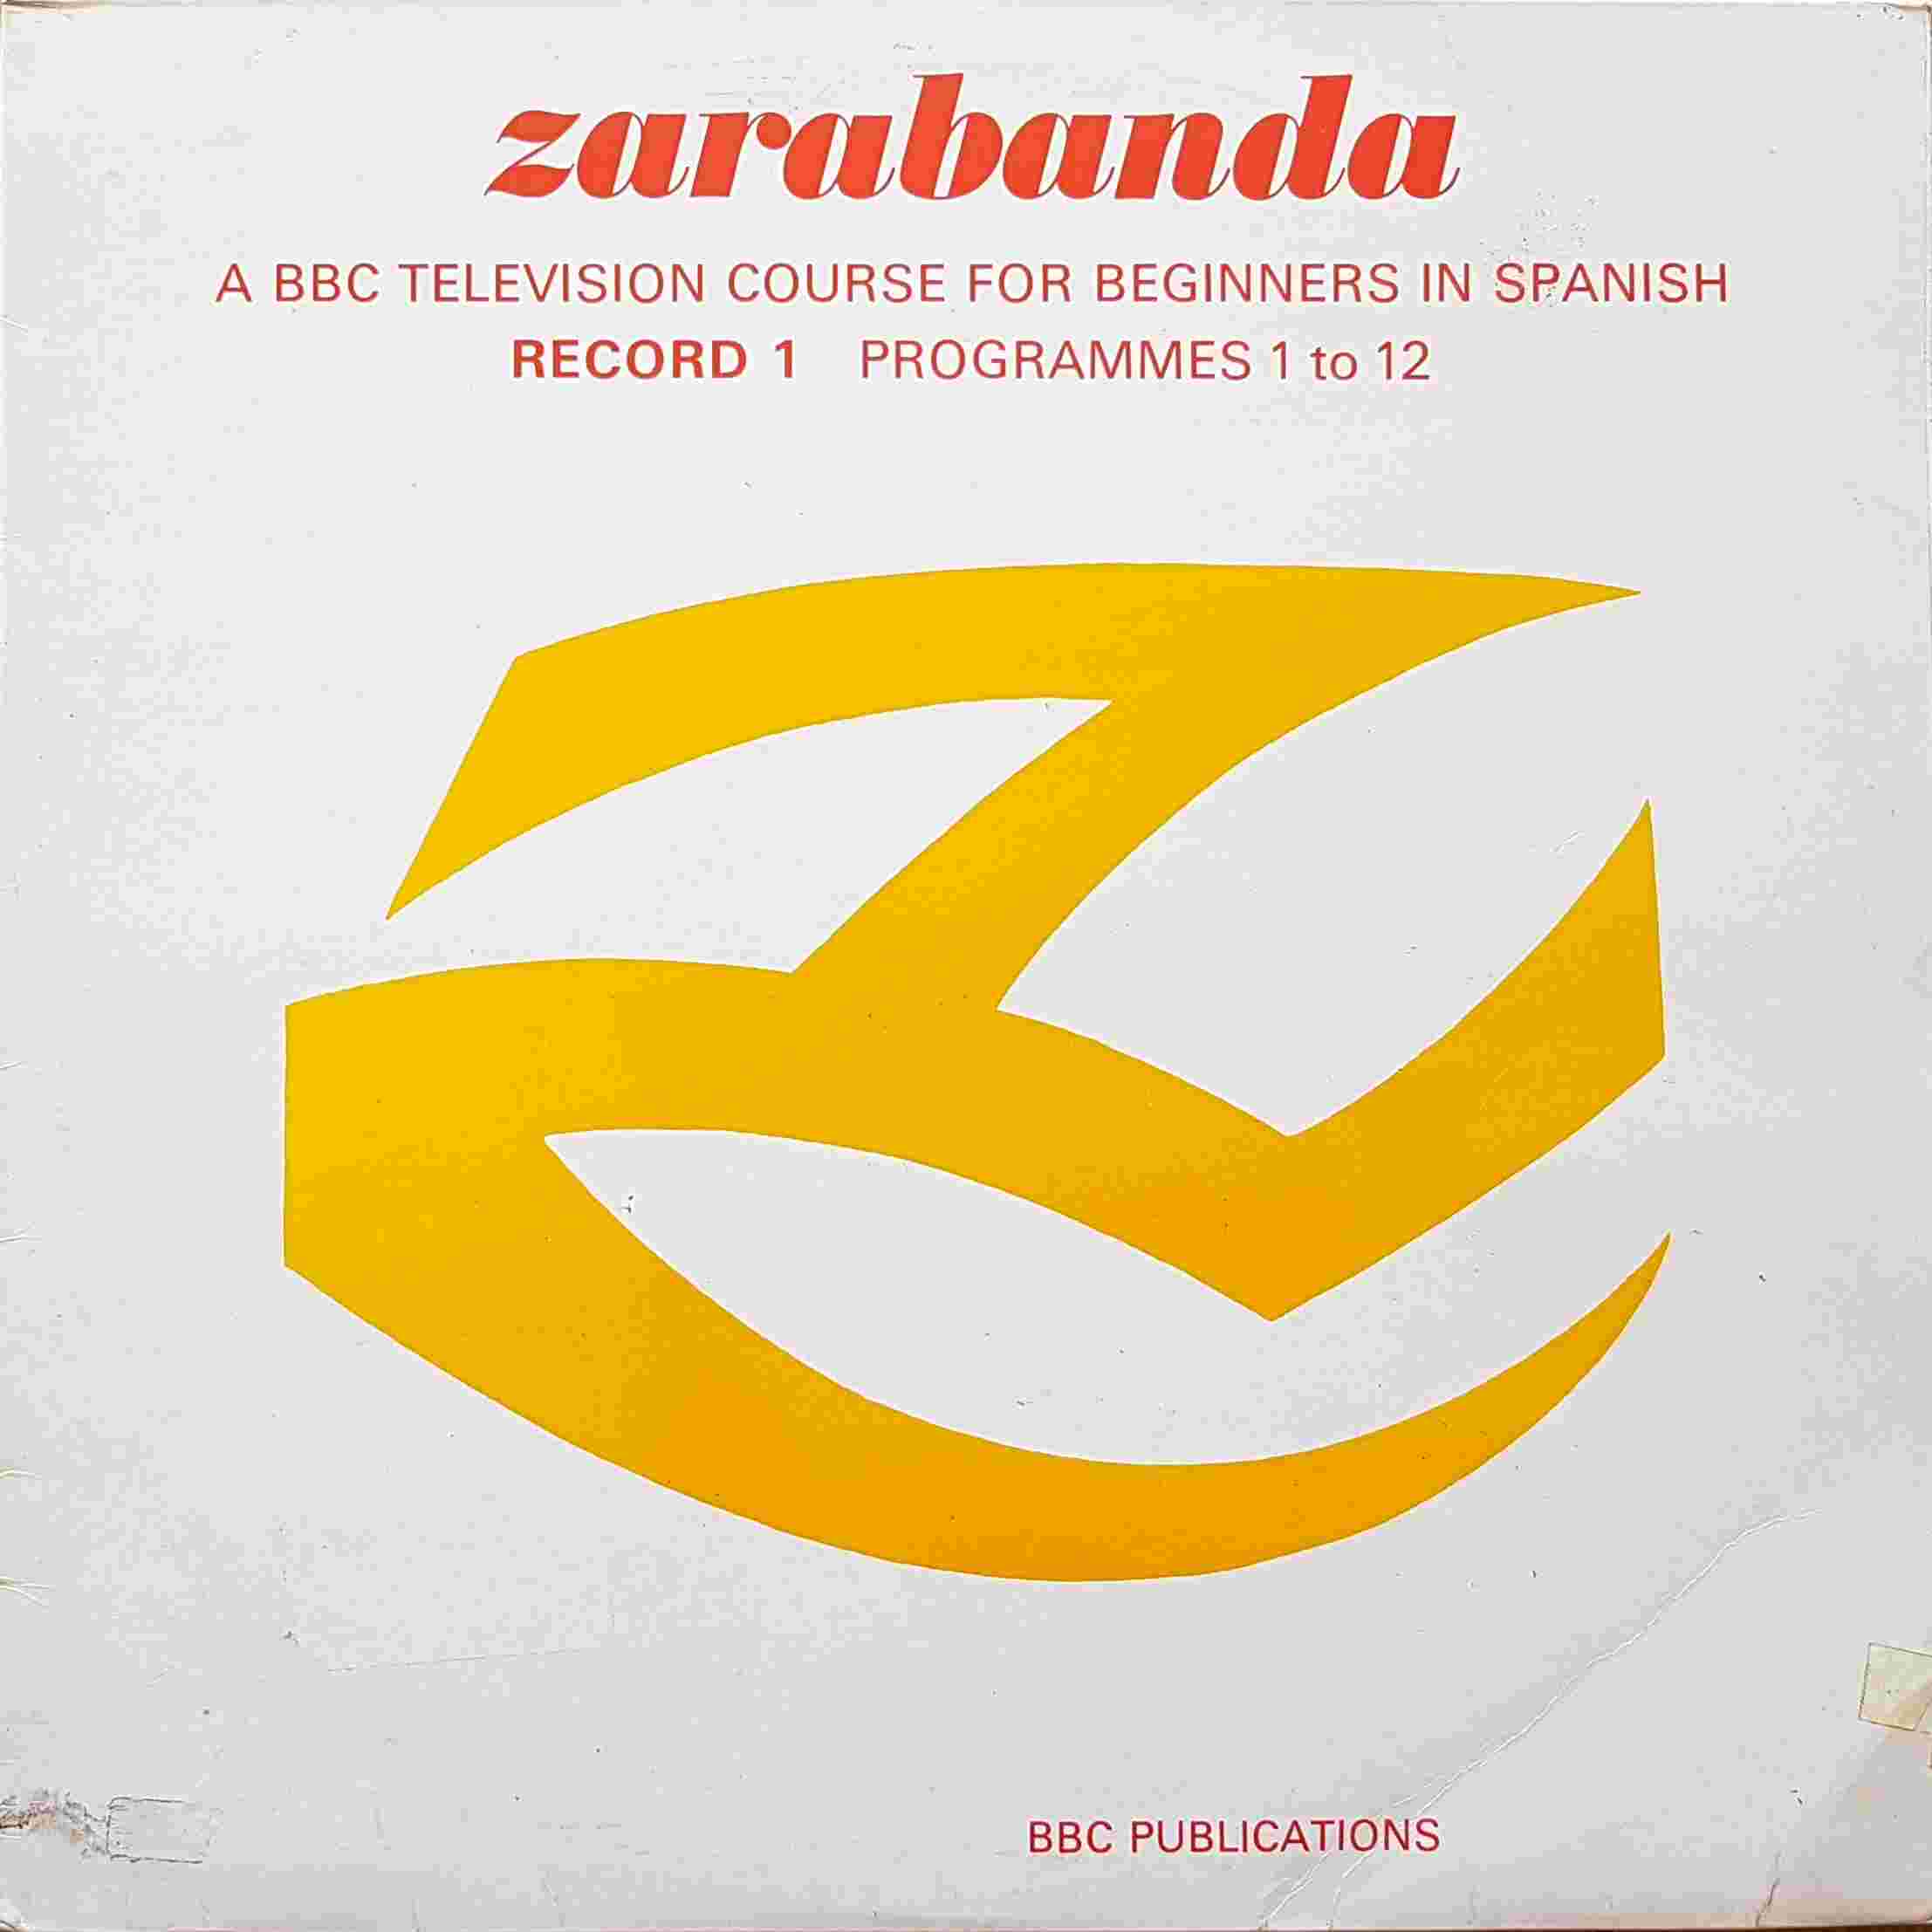 Picture of OP 167/168 Zarabanda - A BBC Television course of 25 programmes for beginners in Spanish - Record 1 - Programmes 1 - 12 by artist Milo Sperber / Manuel Fernandez Gasalla from the BBC albums - Records and Tapes library